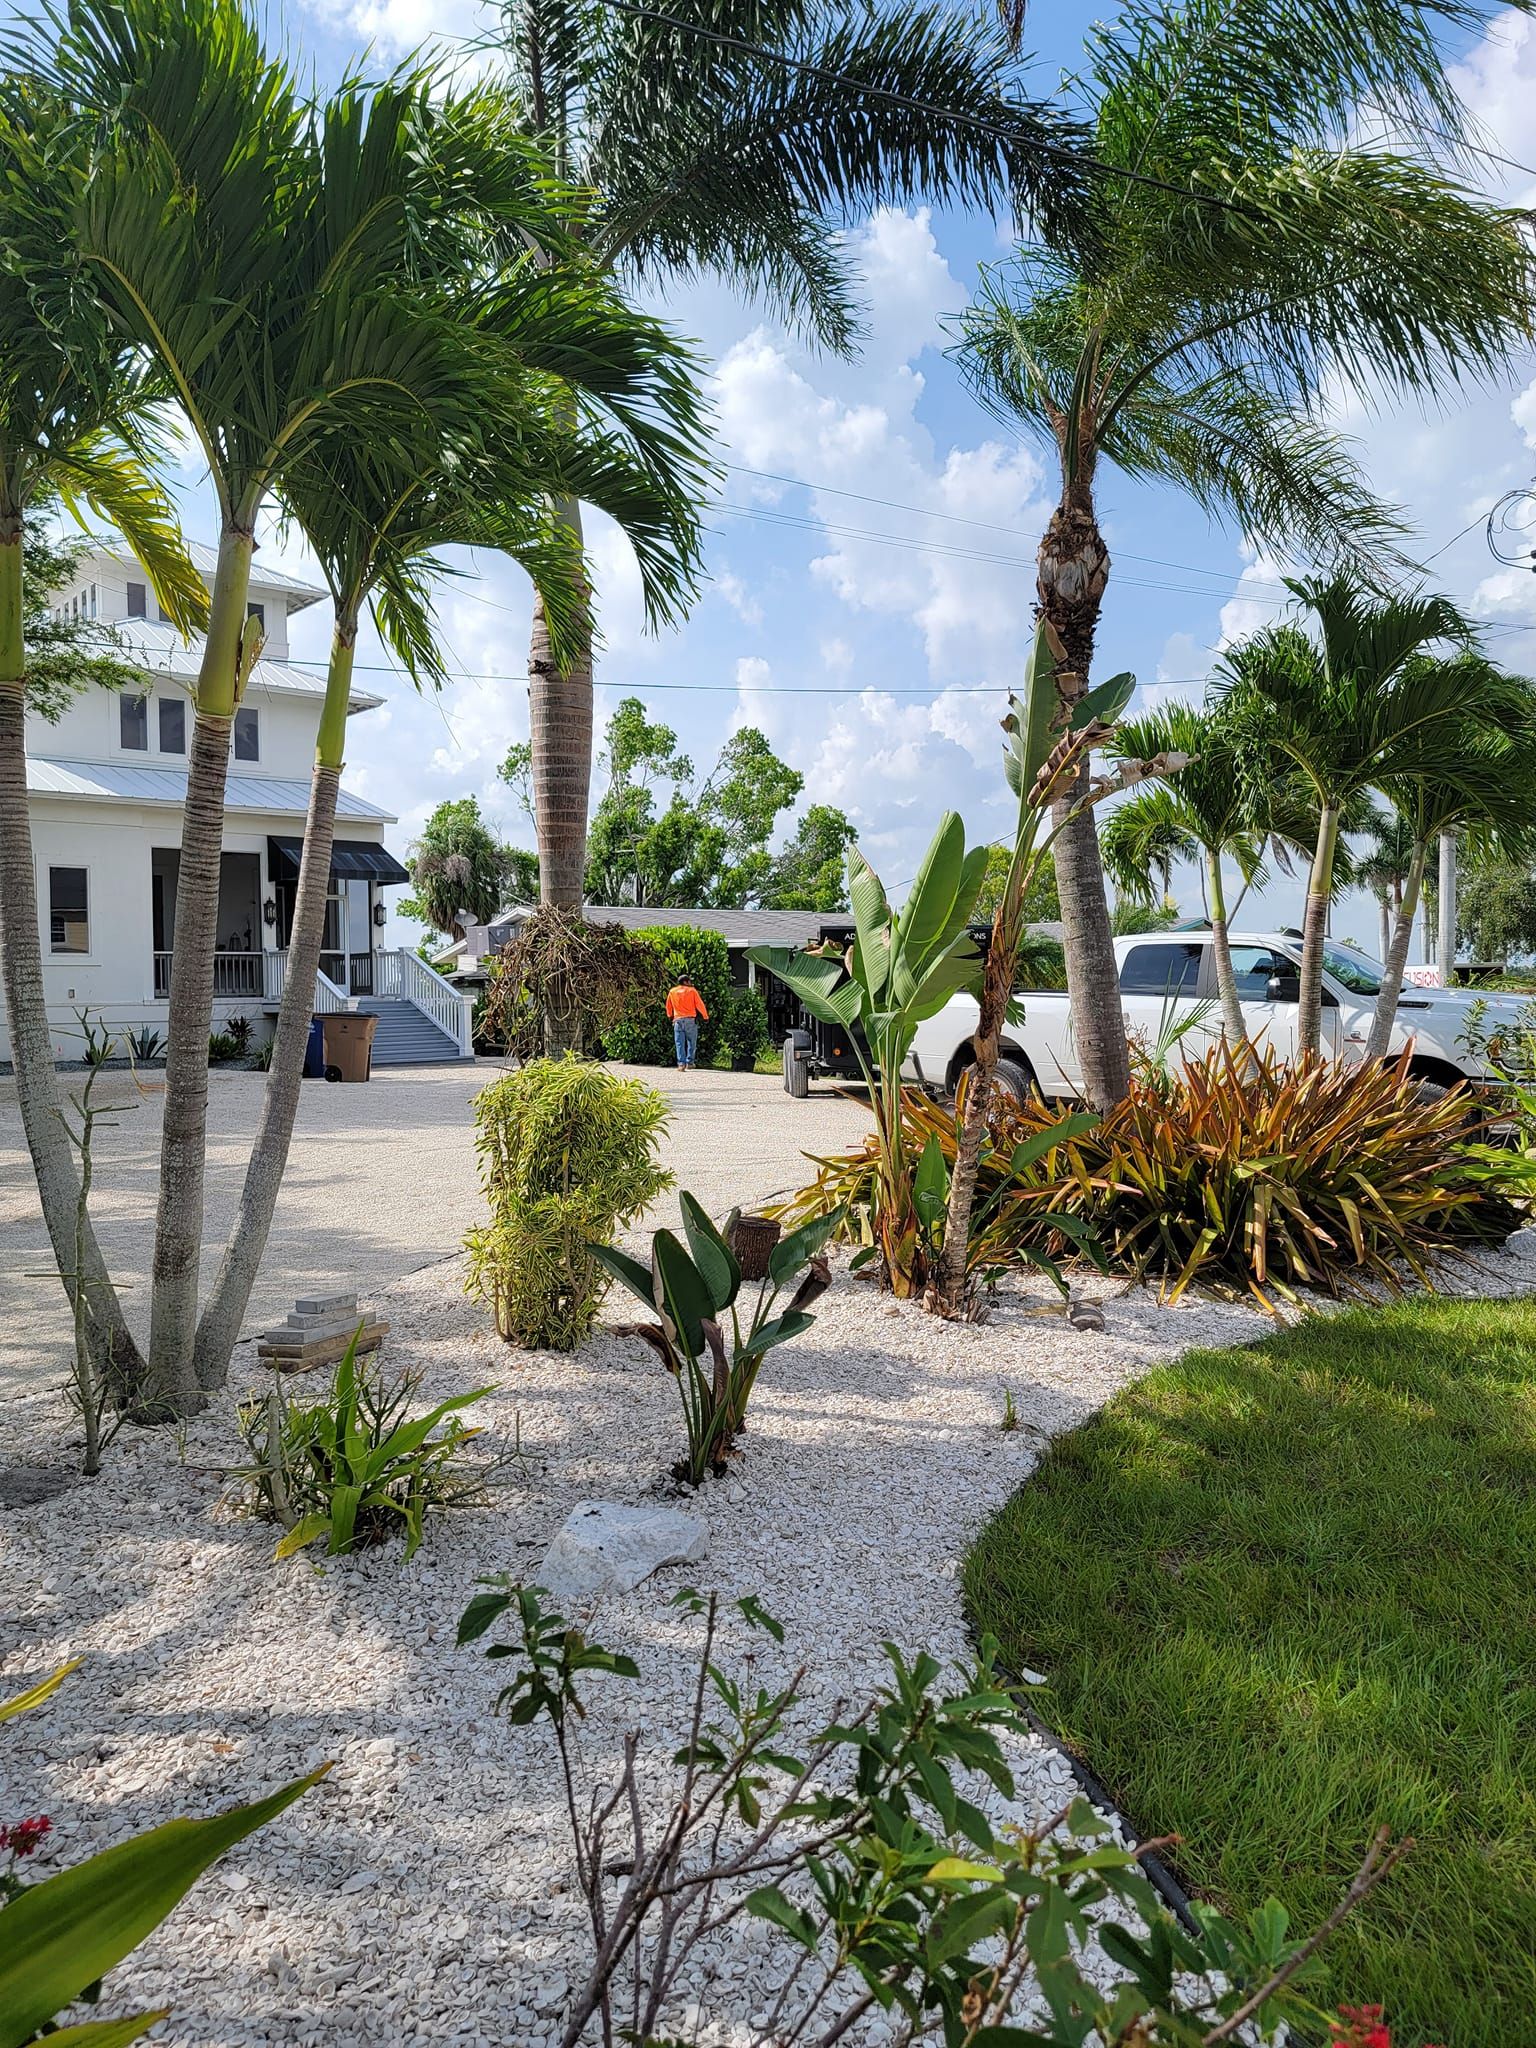 Landscaping for Advanced Landscaping Solutions LLC in Fort Myers, FL